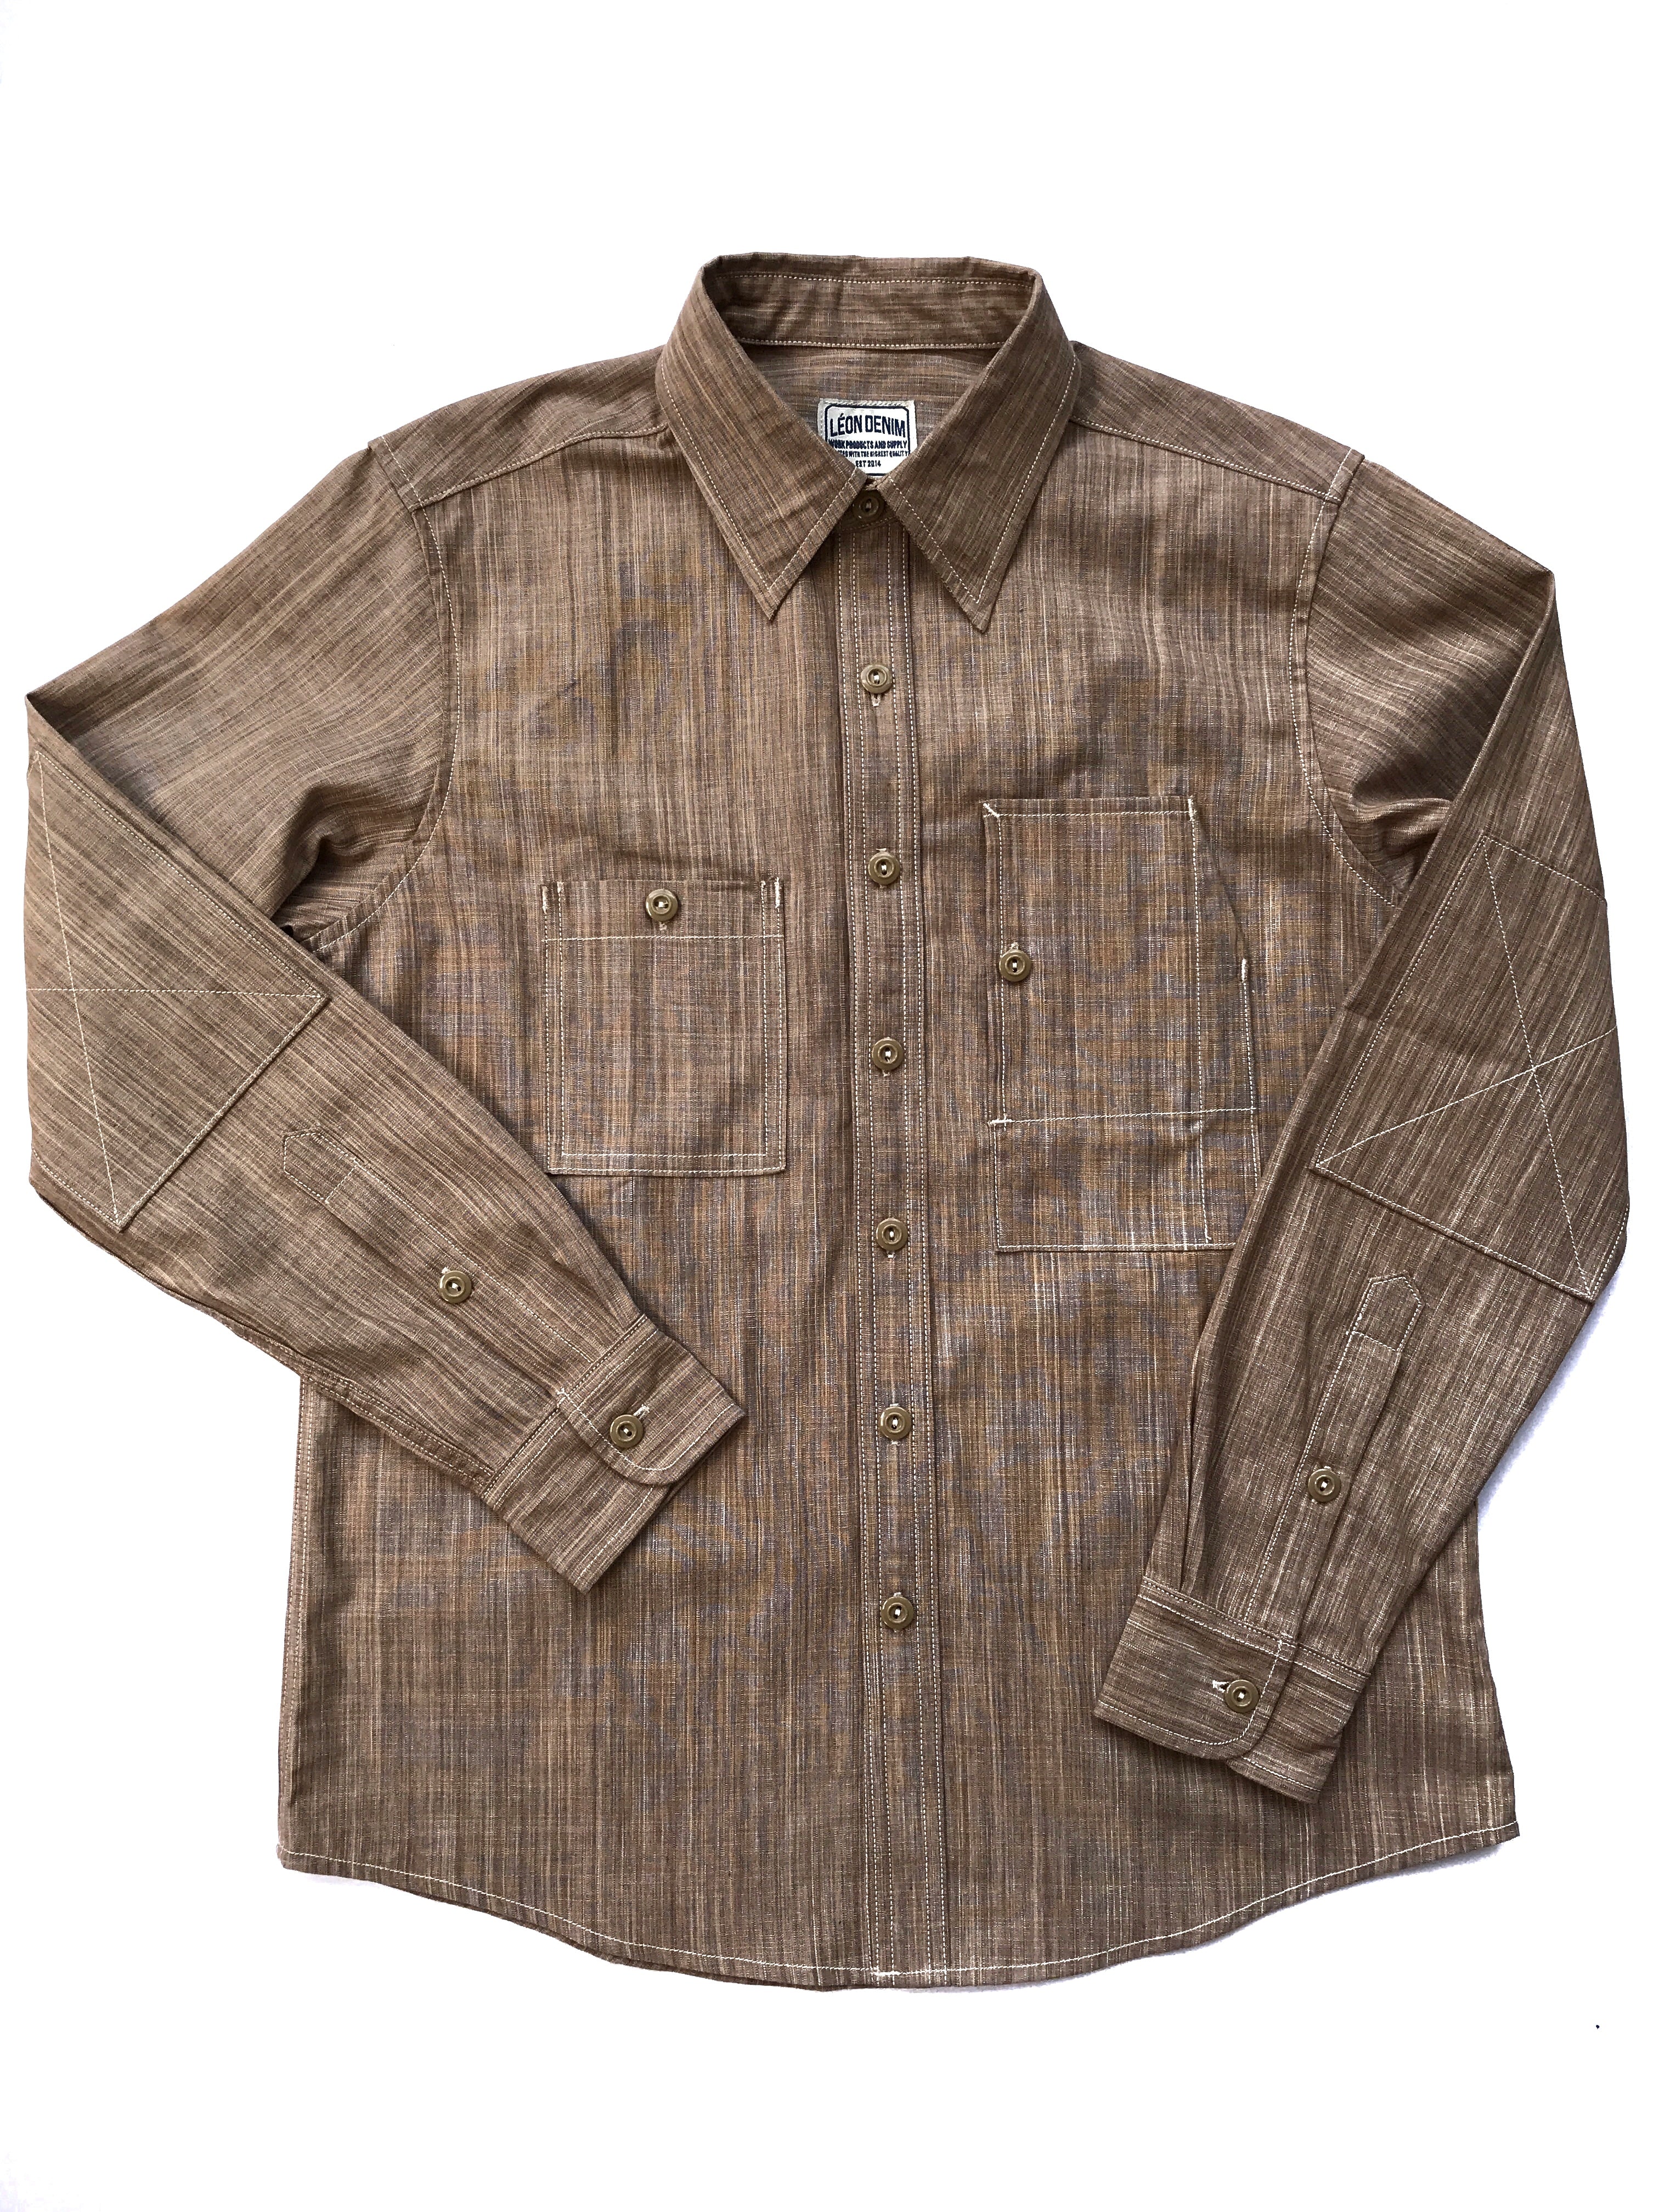 LD Commuter Pocket Shirt in 5 oz. Persimmon Selvedge Chambray